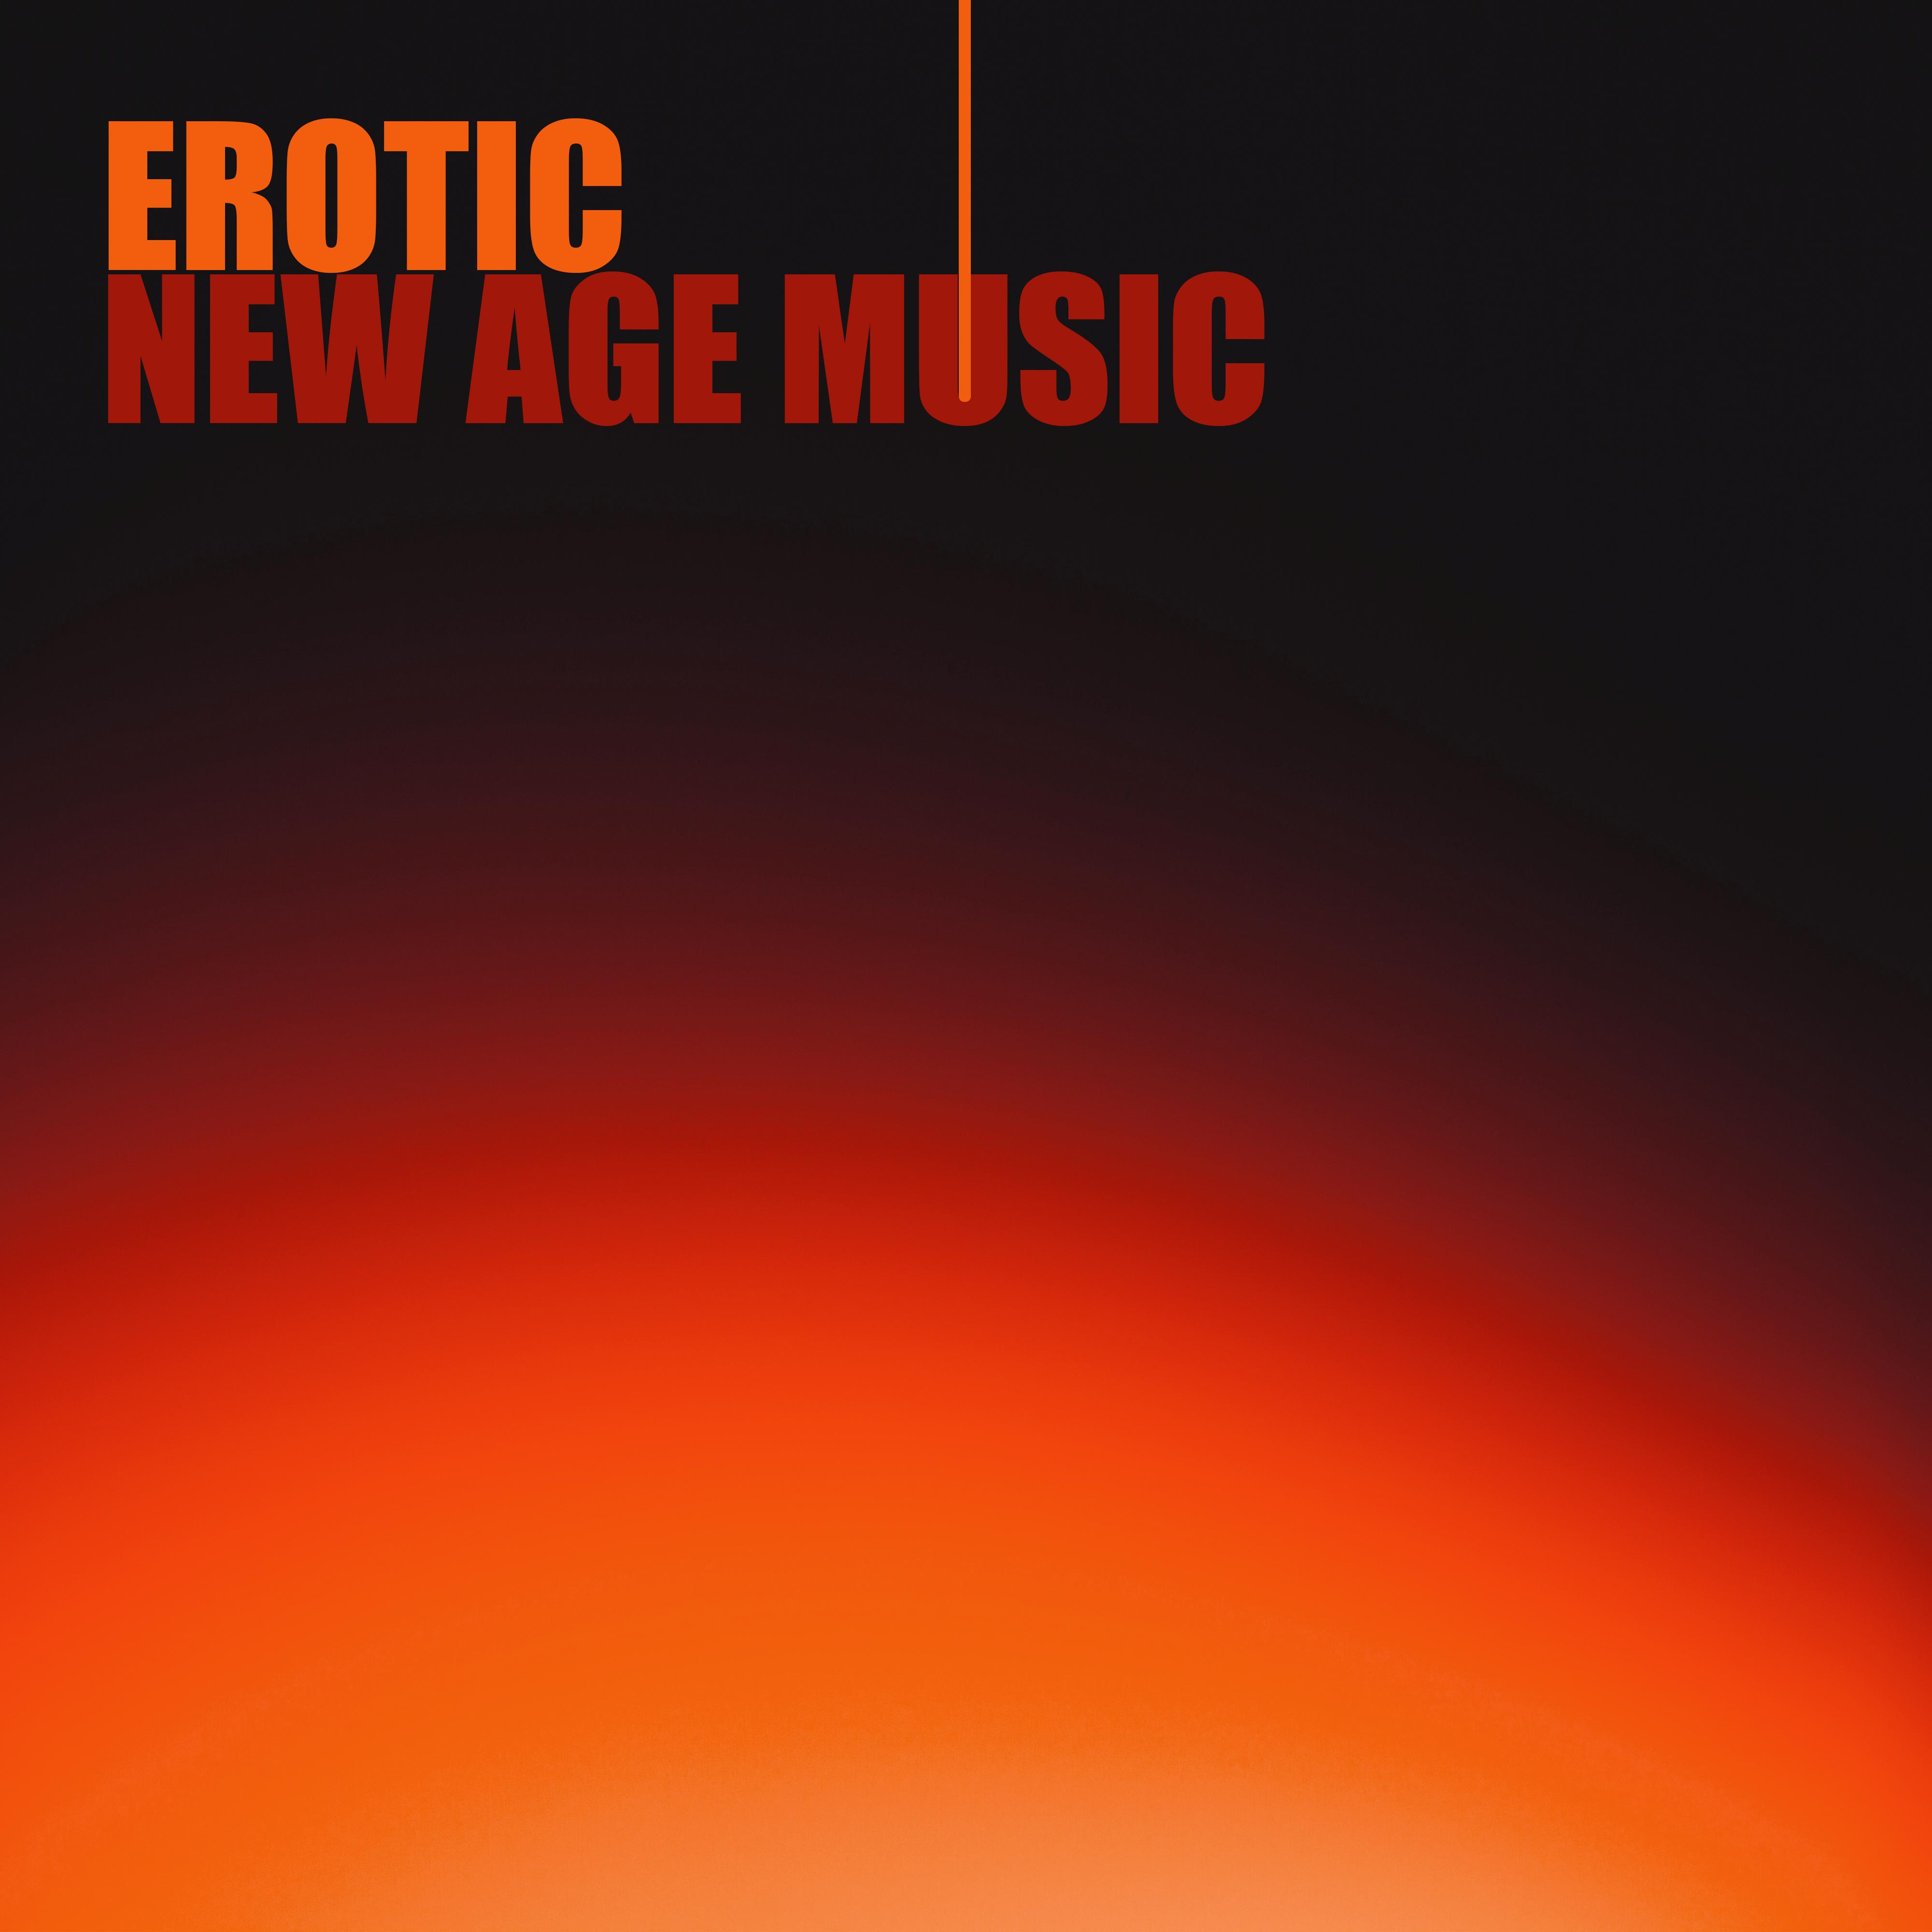 Erotic New Age Music  Soft Sounds to Rest, Music to Calm Down, Romantic Night with New Age Sounds